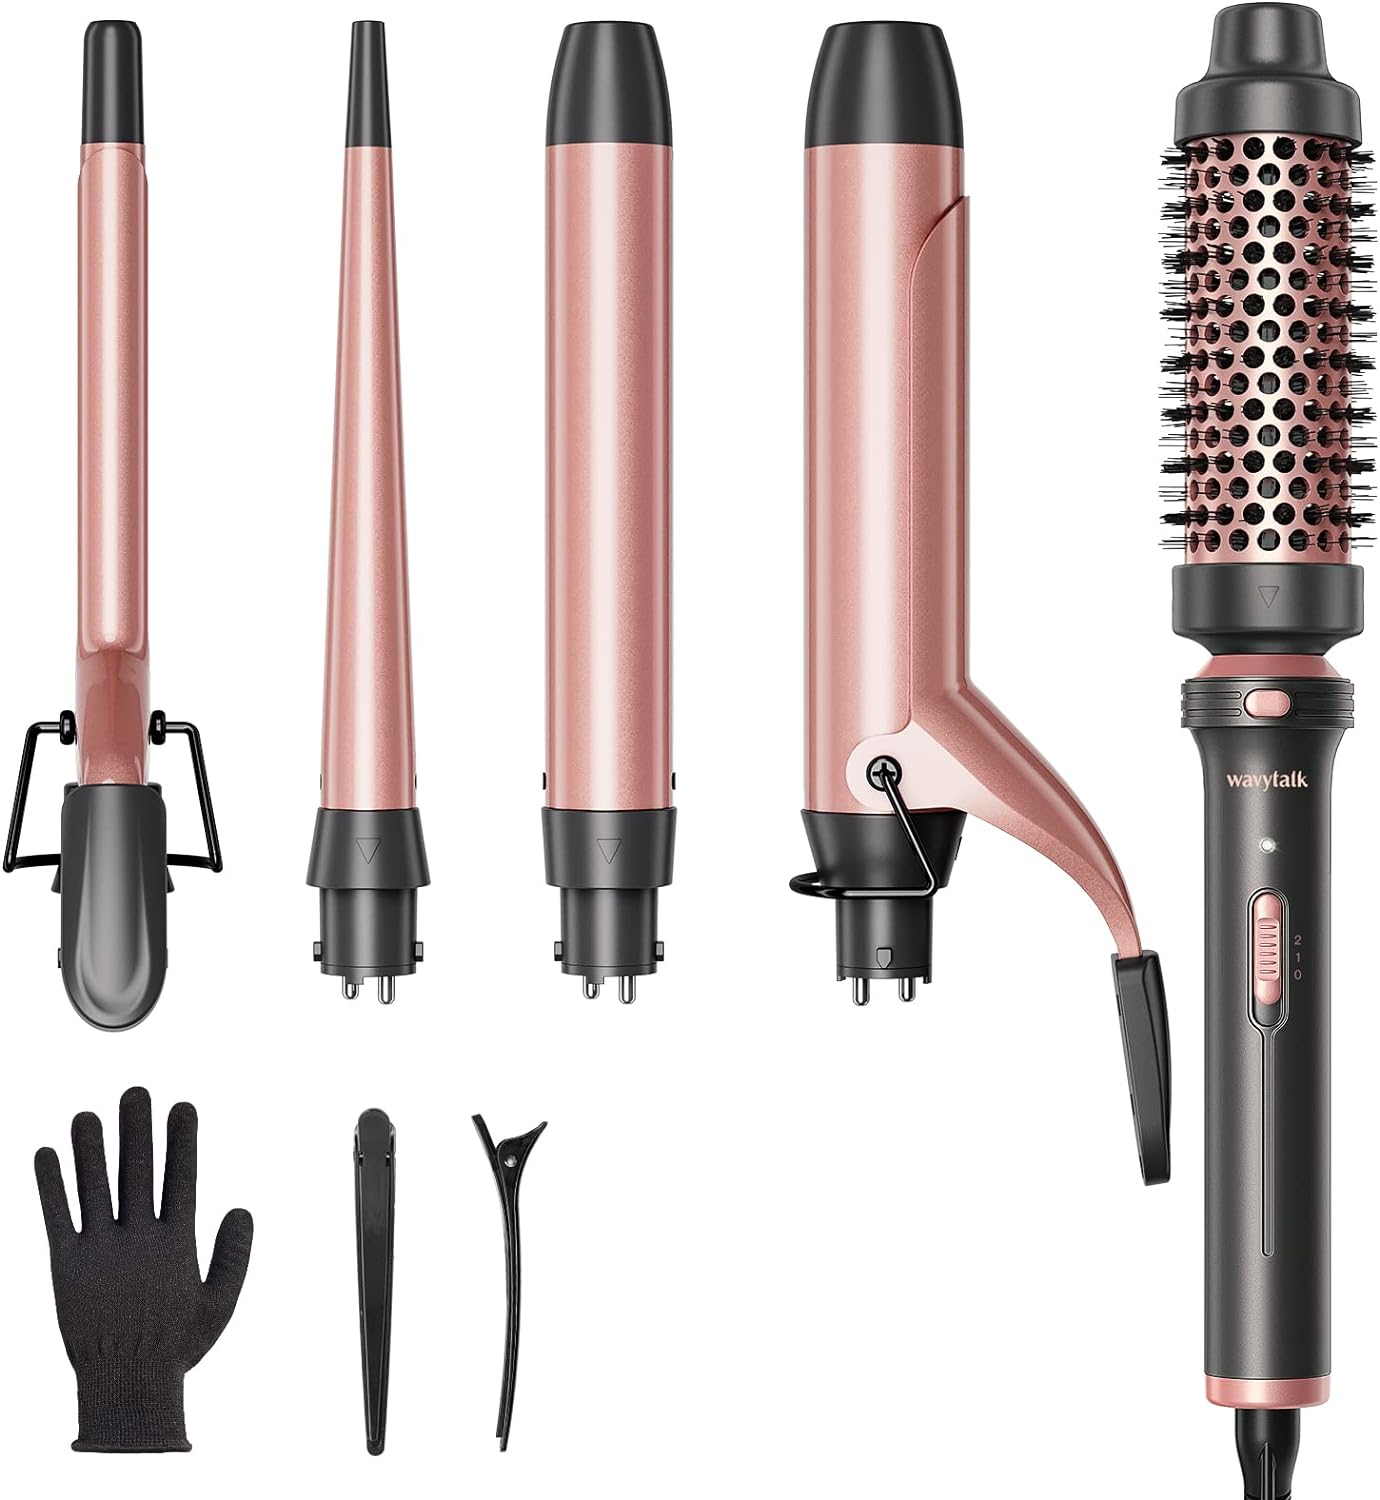 Wavytalk 5 in 1 Curling Iron Set with Curling Brush and 4 Interchangeable Ceramic Curling Wand (0.35-1.25), Instant Heat Up, Dual Voltage Hair Curler